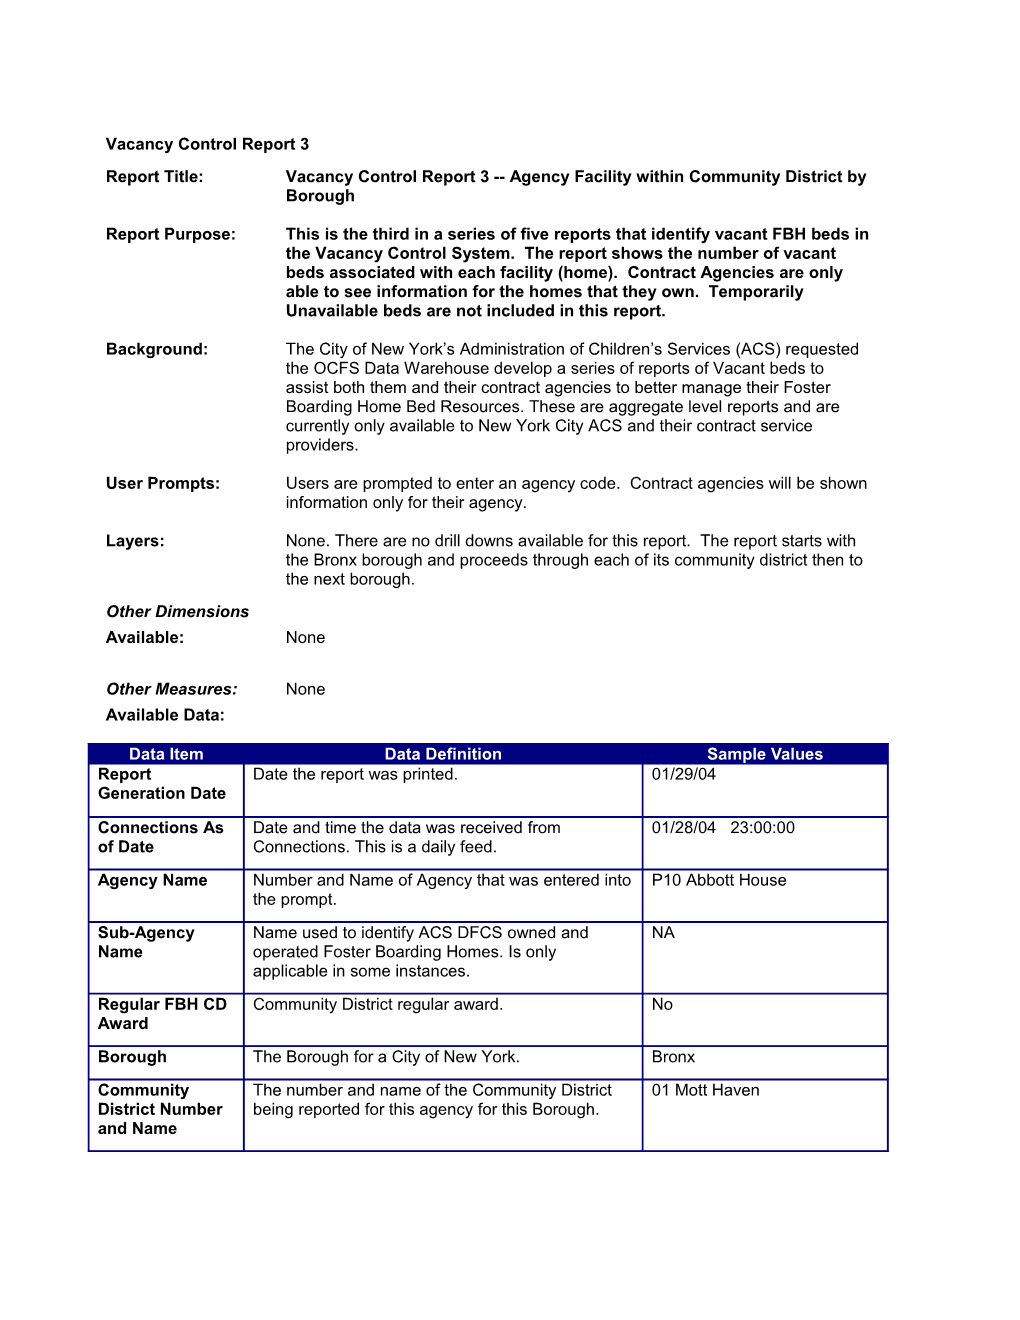 Report Title:Vacancy Control Report 3 Agency Facility Within Community District by Borough